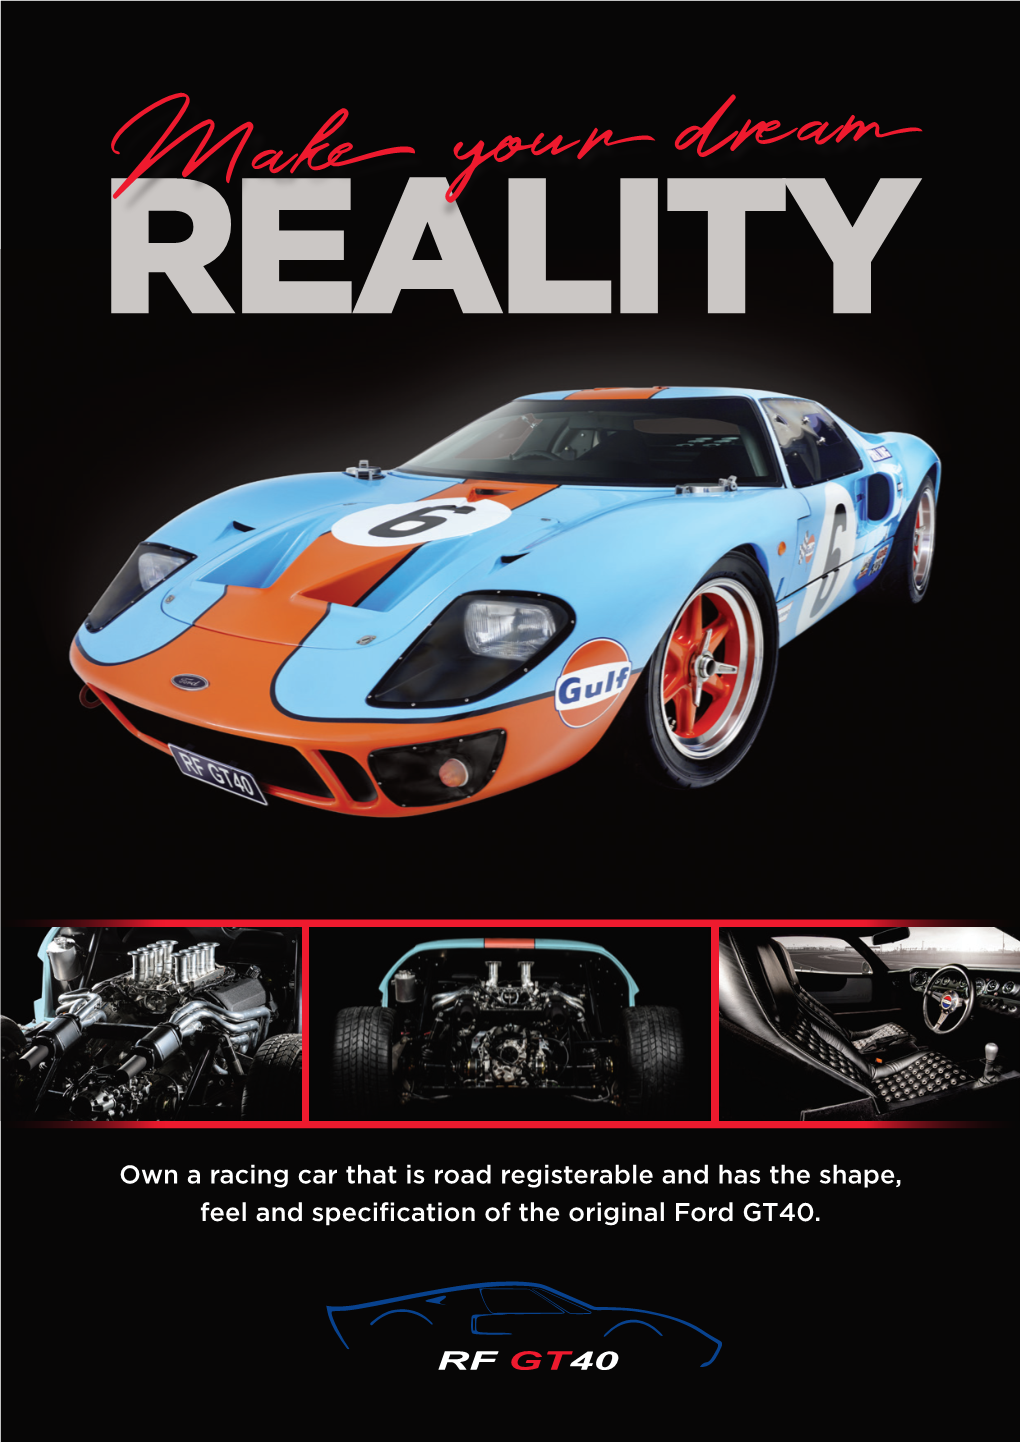 Own a Racing Car That Is Road Registerable and Has the Shape, Feel and Specification of the Original Ford GT40